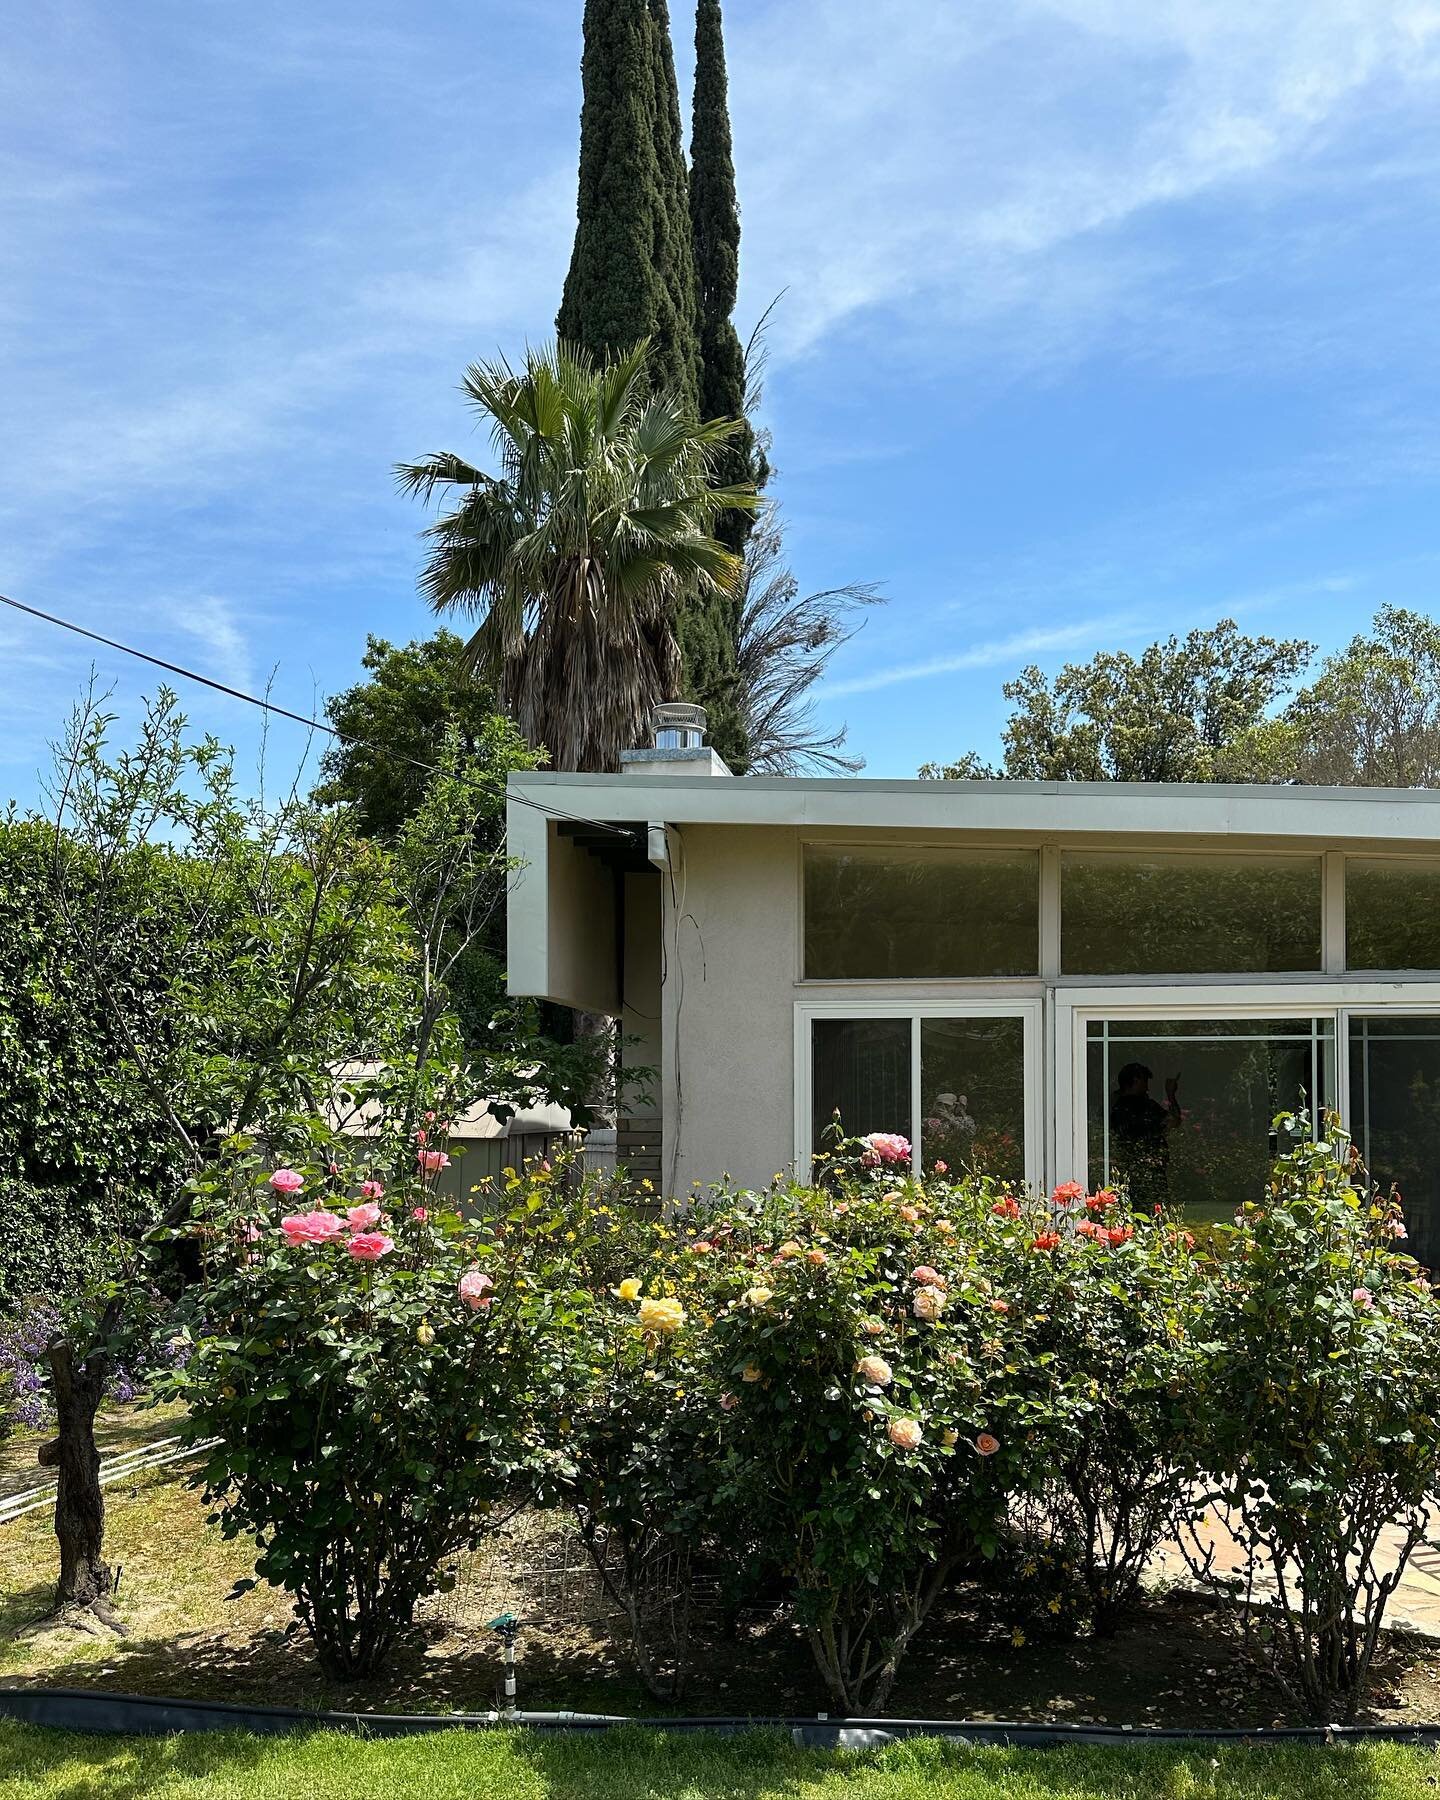 Quintessential Cali mid-century modern deep in the Valley - with a dreamy garden to go with it 🌼

4 bedroom | 2 bathrooms
$799,000